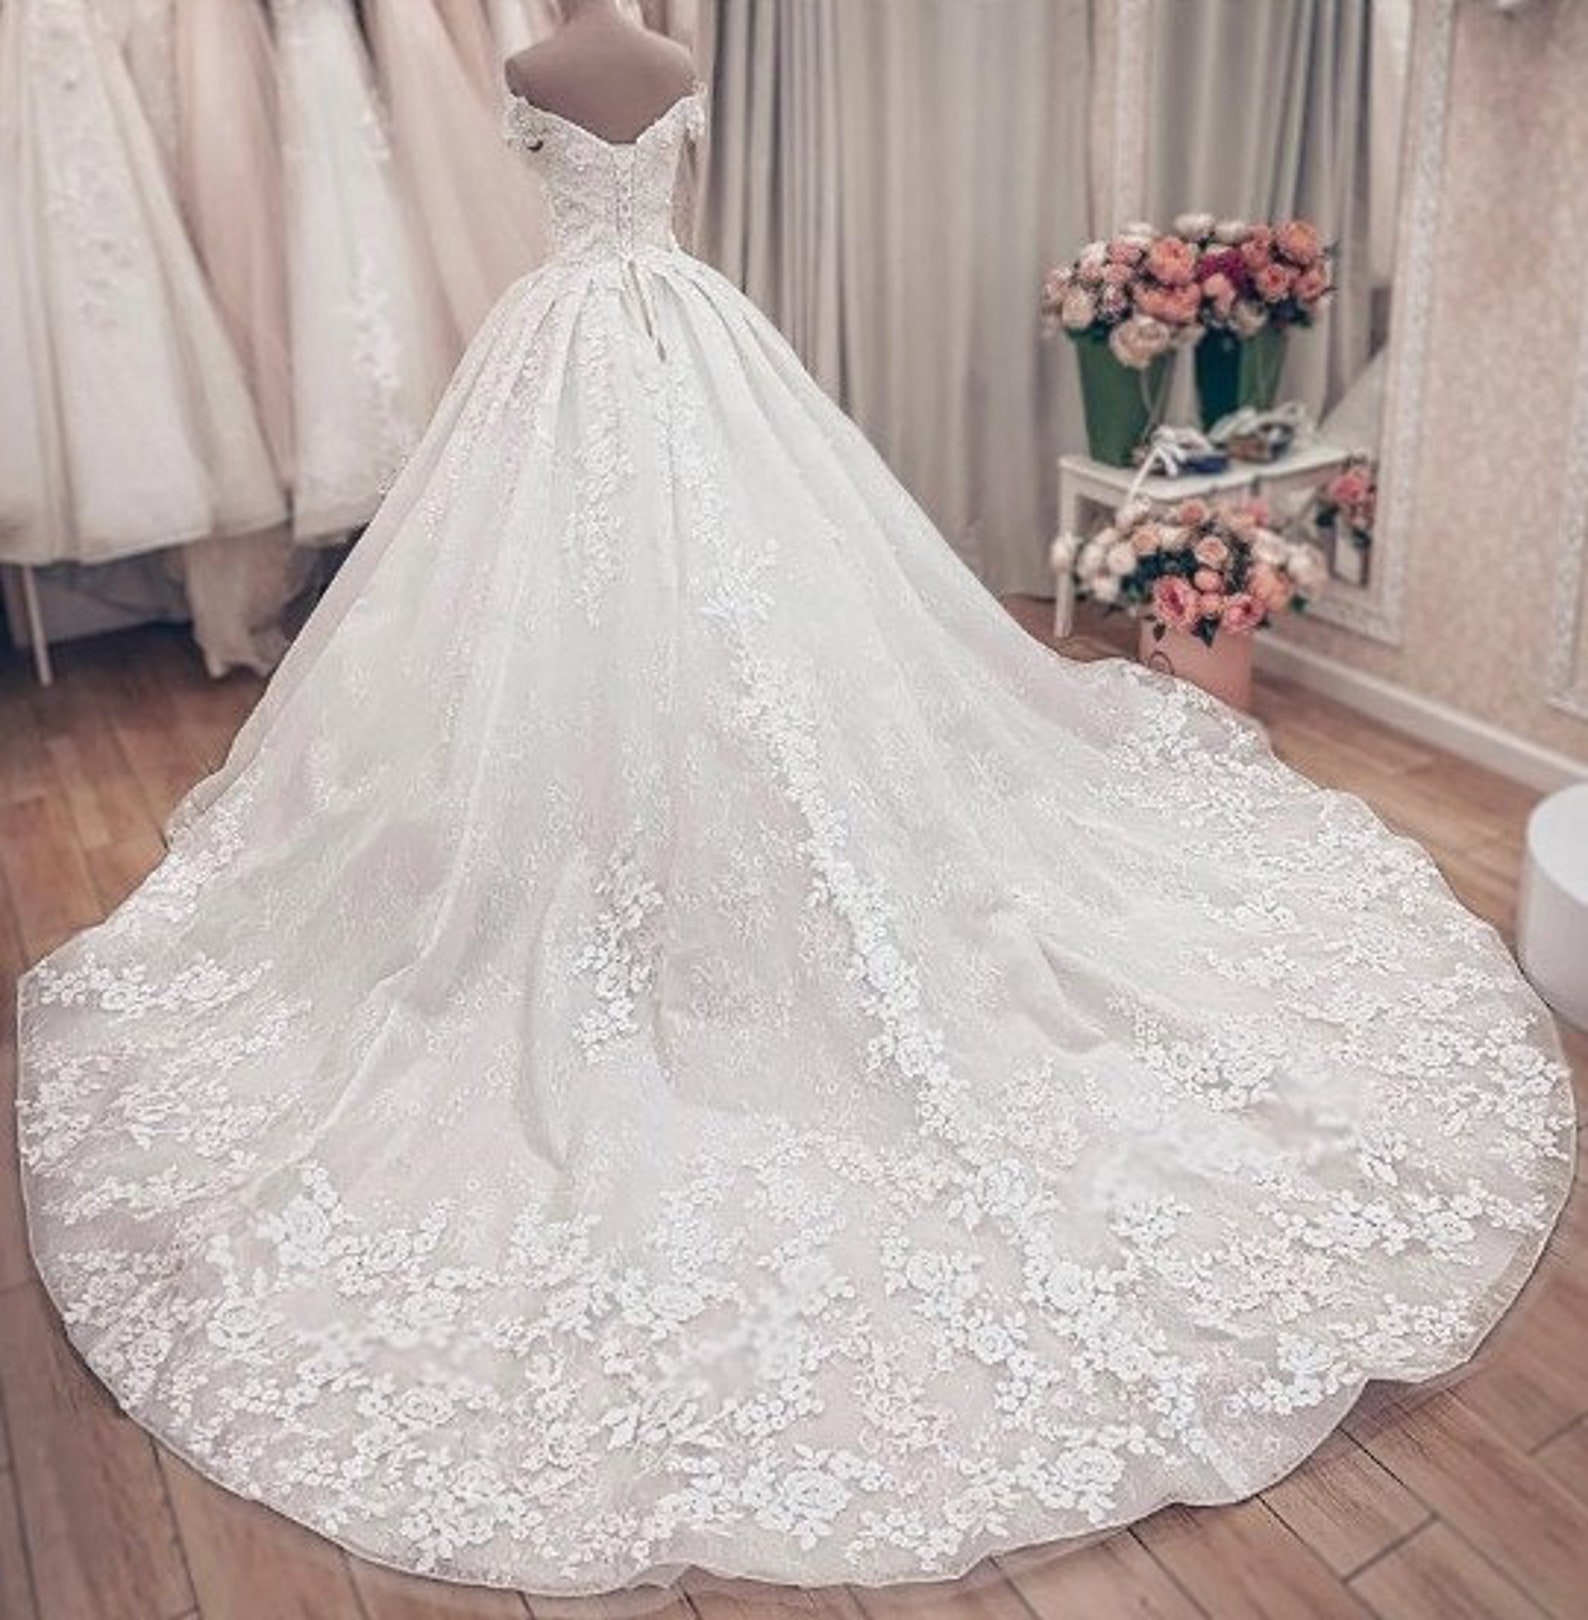 Princess Style Lace Wedding Dress Ball Gown Beach Bride - Etsy